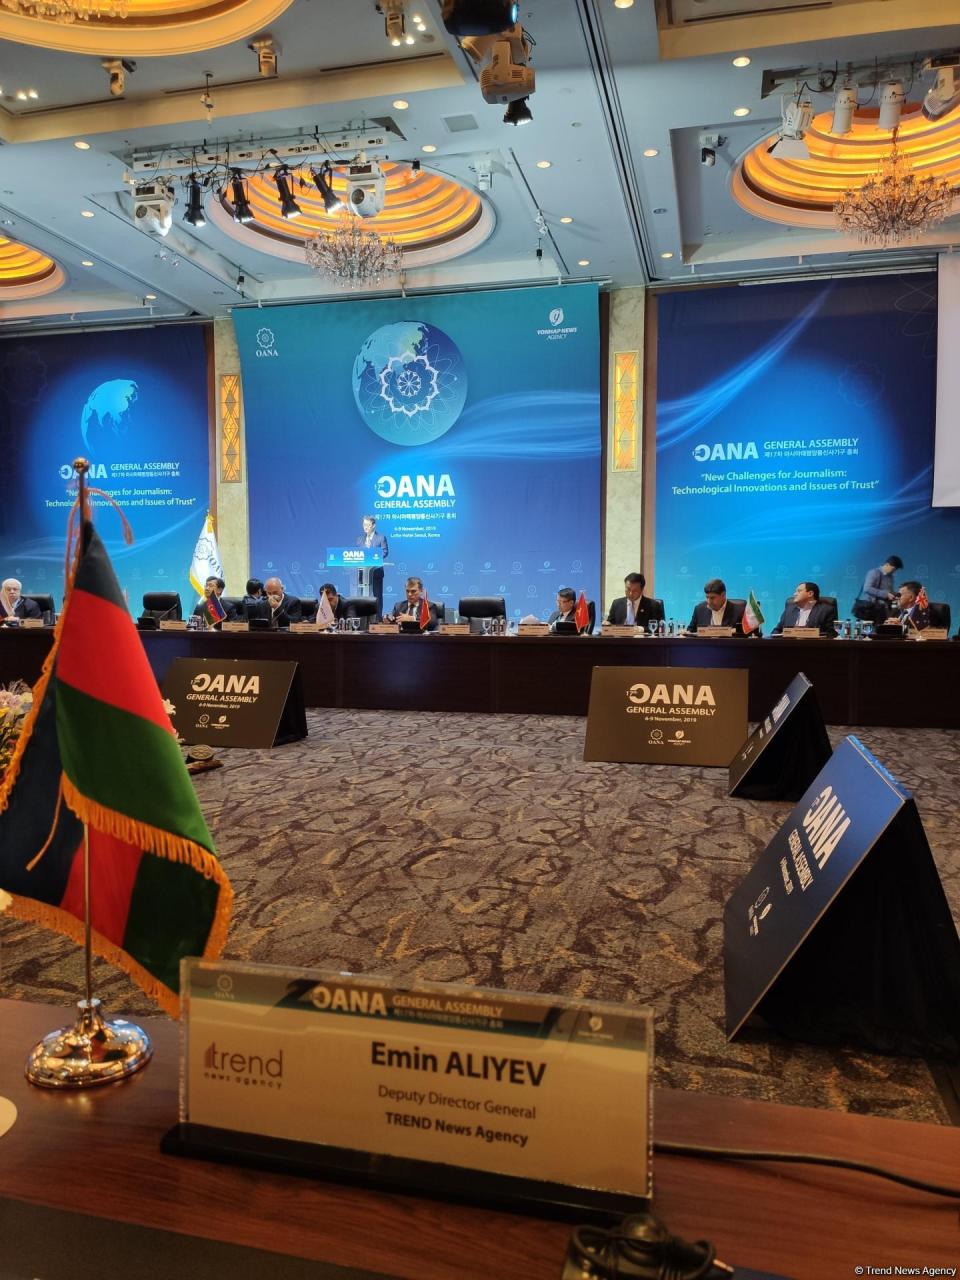 Trend News Agency taking part in 17th OANA General Assembly in Seoul [PHOTO]